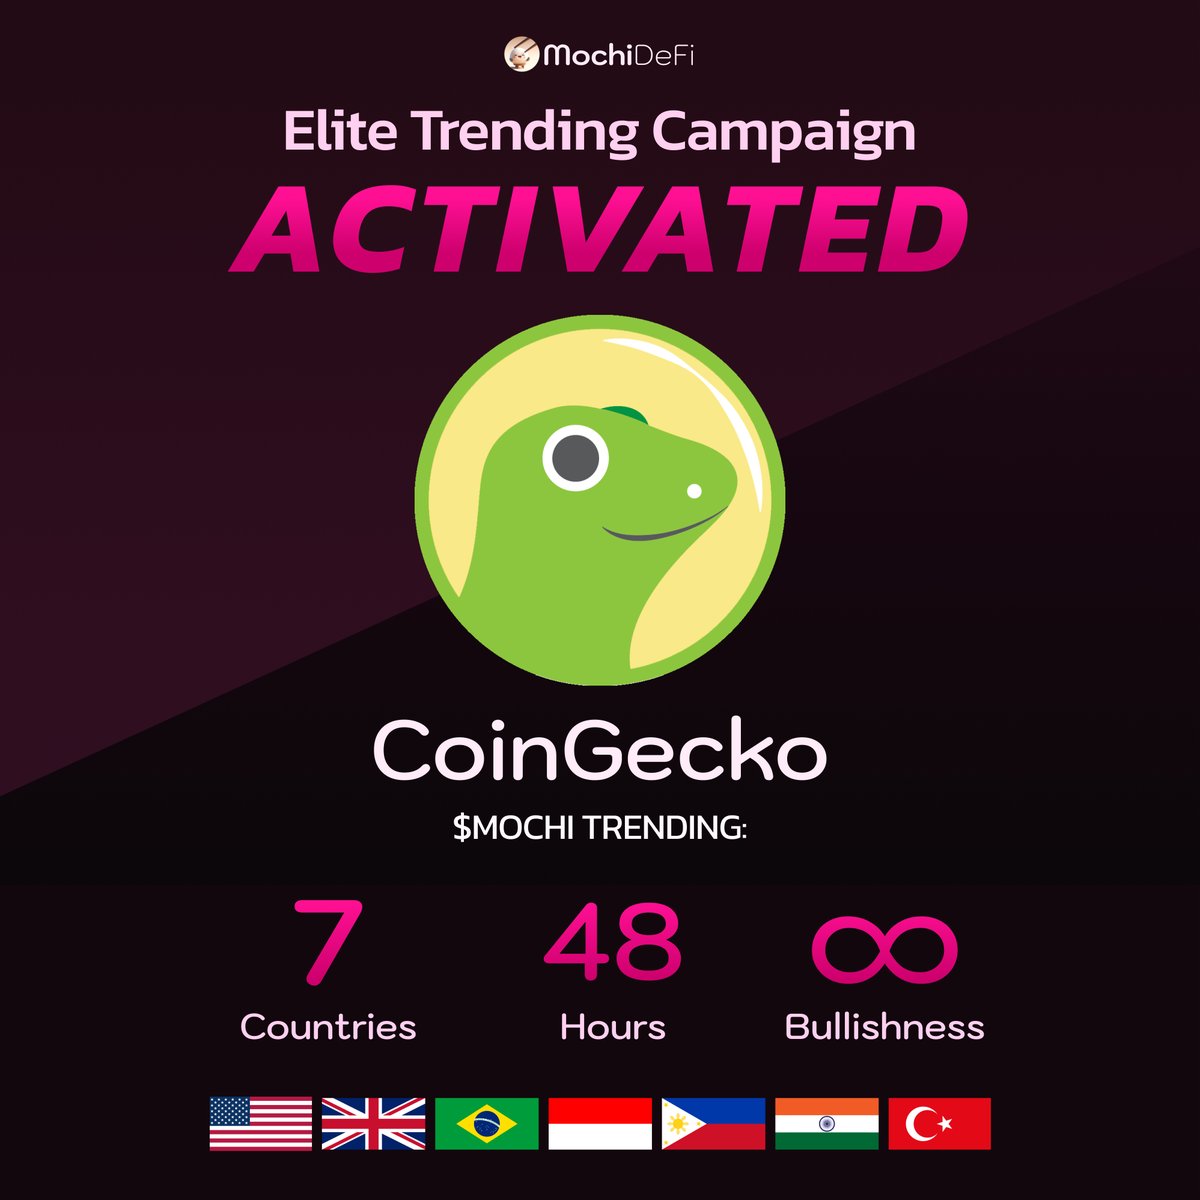 🚨 ELITE TRENDING ACTIVATED ON #CoinGecko 

$MOCHI will be a top trending coin on Coingecko for the next 48hrs in 7 countries.

Full details: t.me/Mochi_DeFi/884…

It's #GOTIME. Beast-mode kicking up a notch. Bullish tuesday ahead with non-stop marketing and community